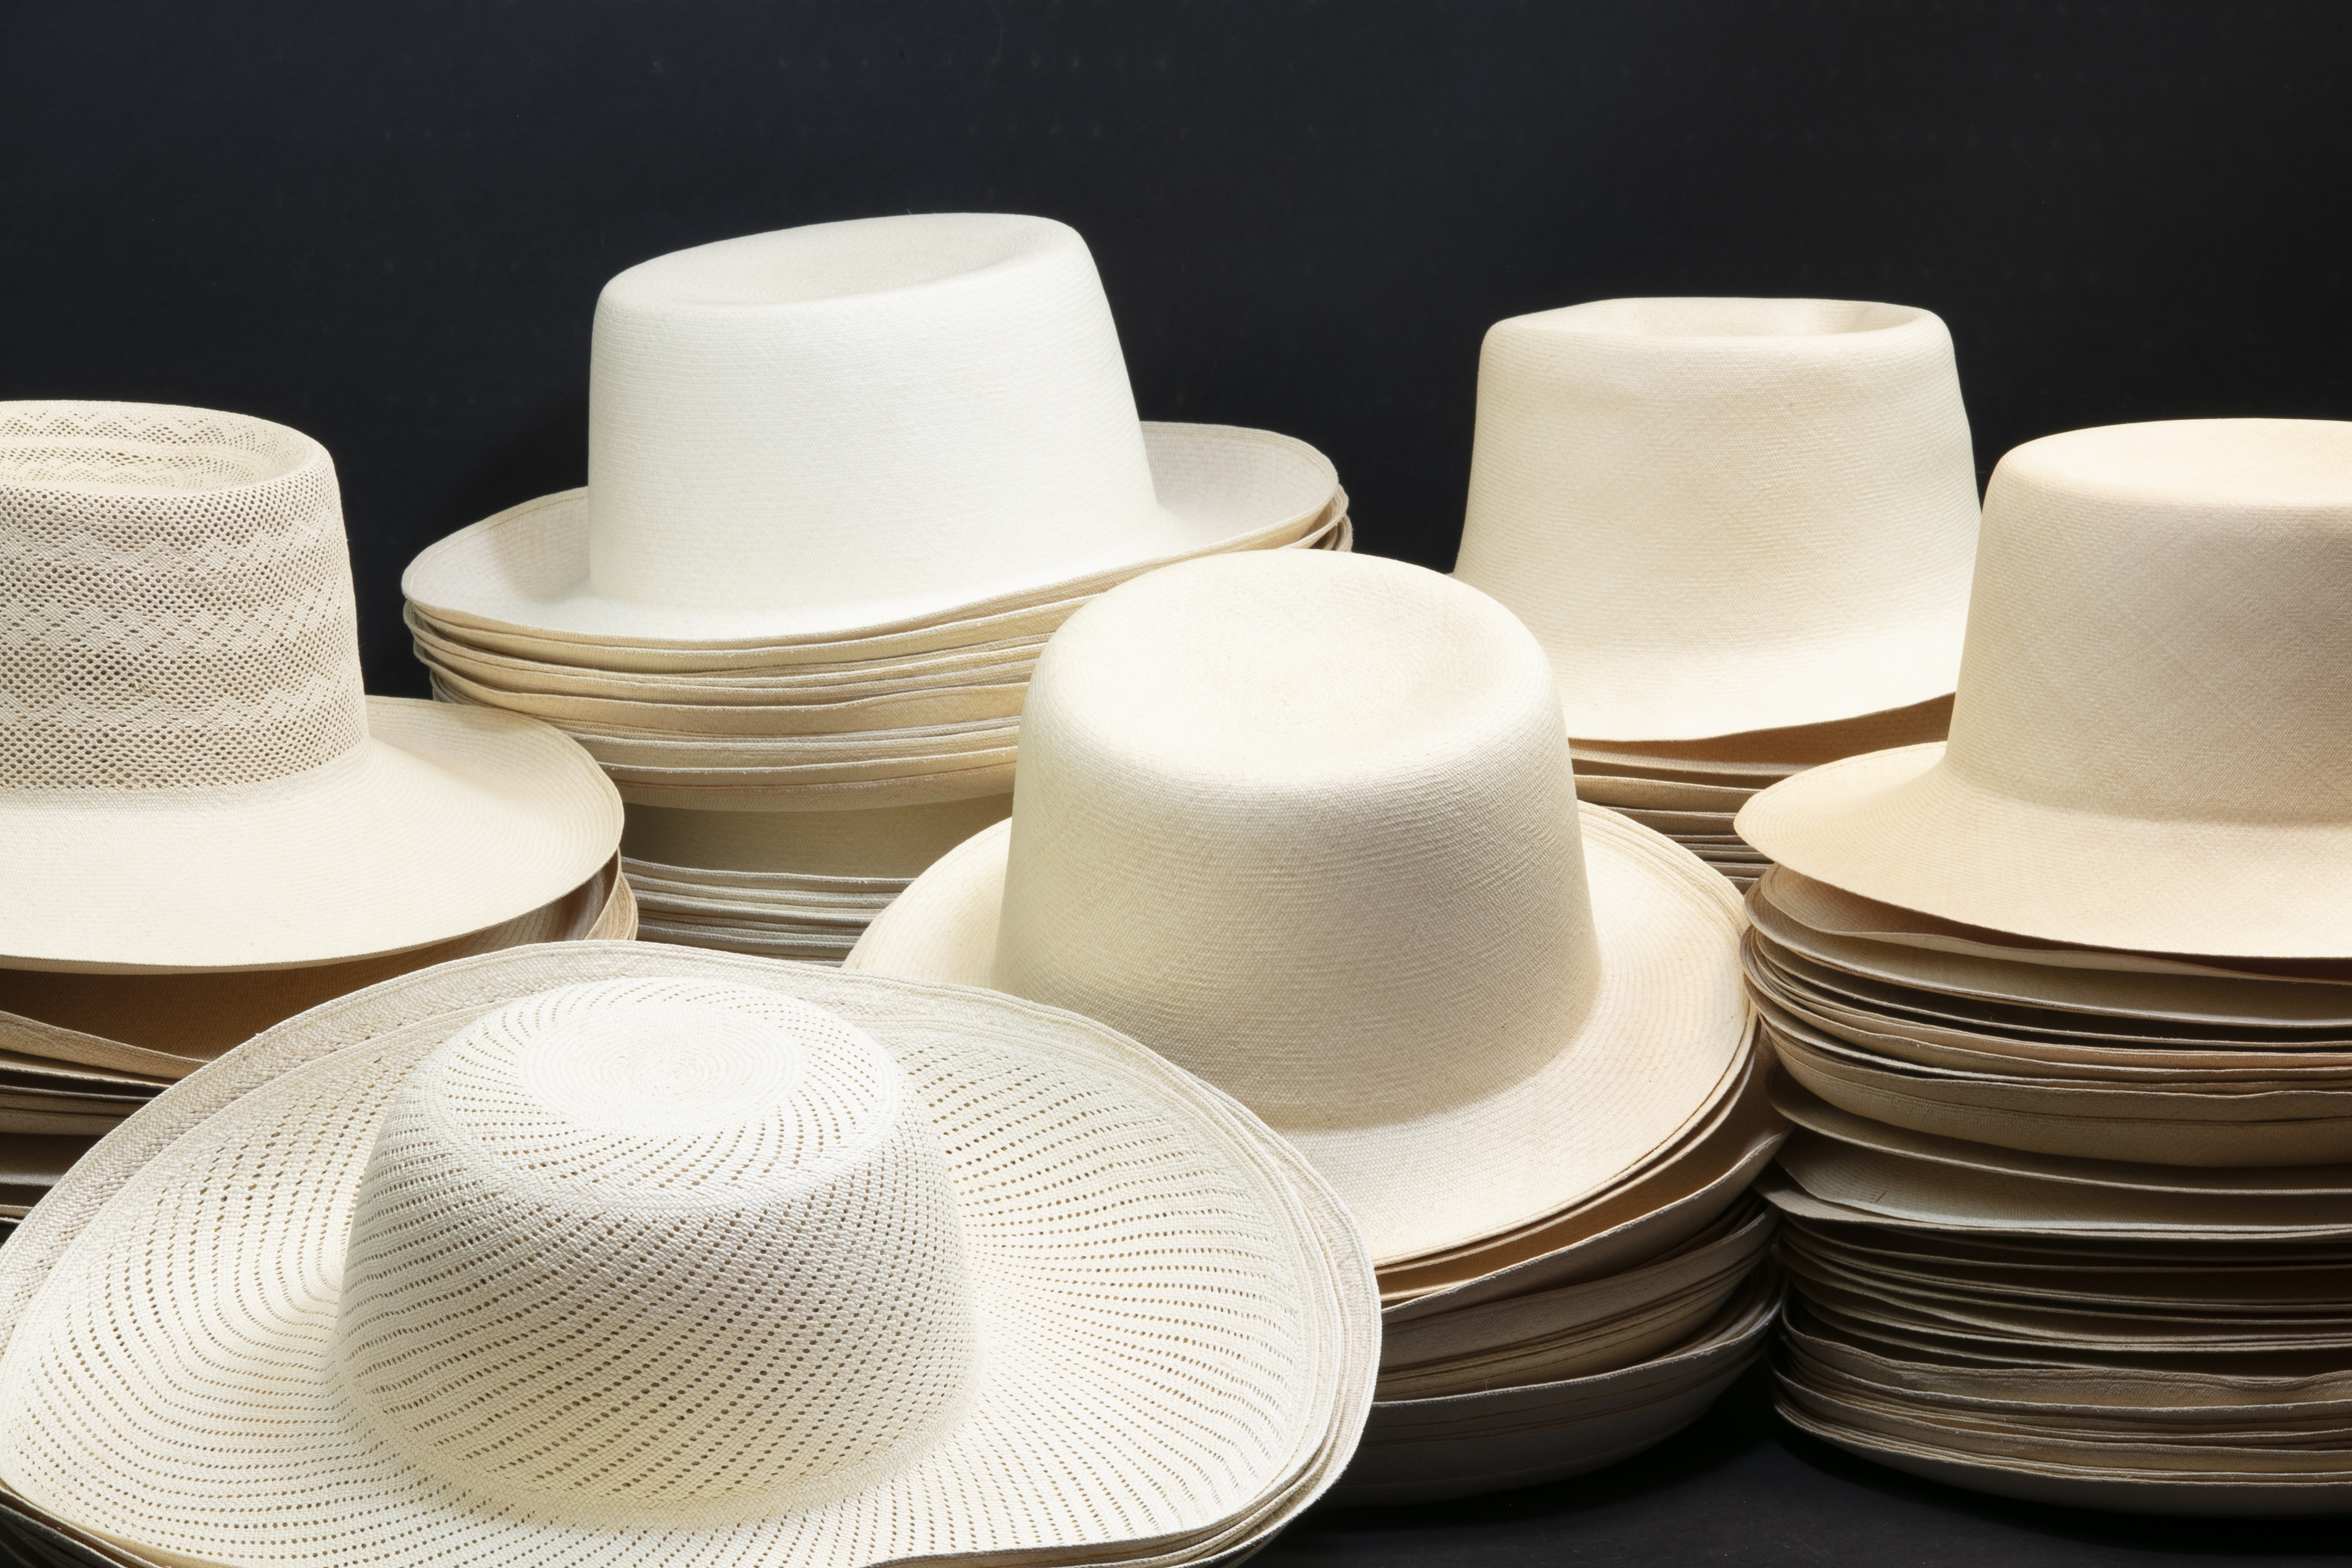 Montecristi hats are the crown jewels of Panama hats.